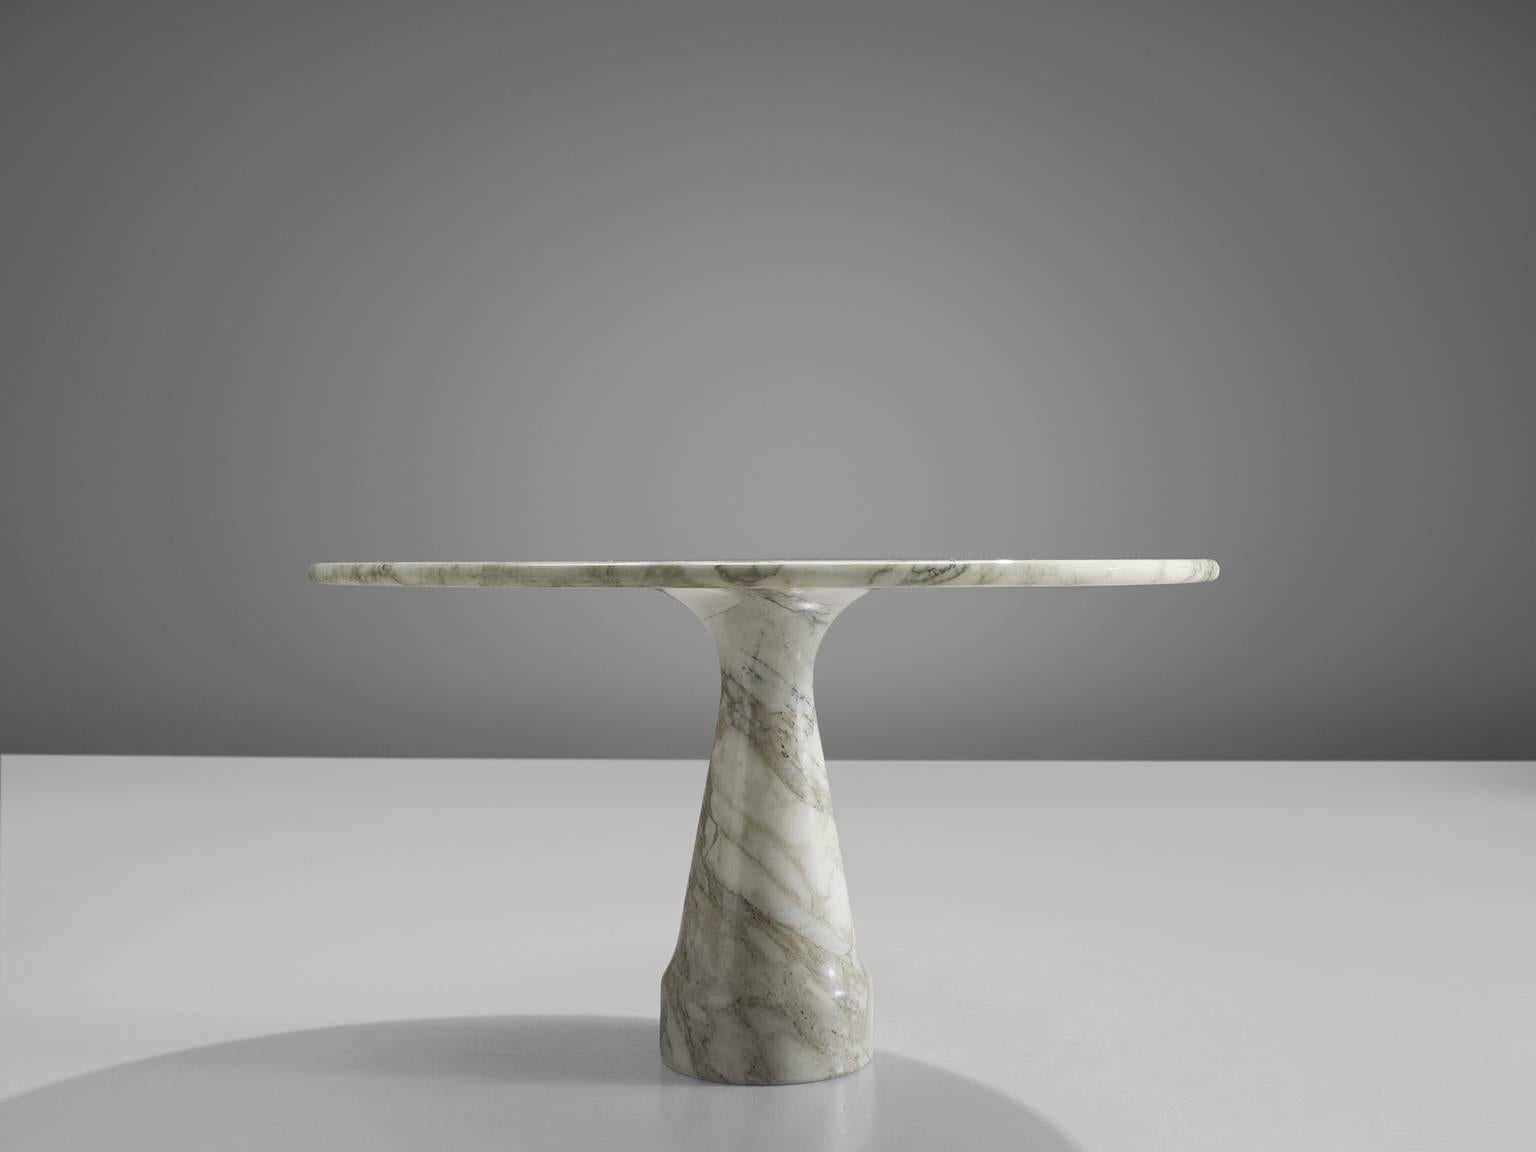 Dining table, marble, Italy, 1970s.

This marble shows wonderful grain vains and has a cone shaped base and a circular top. The circular top rests perfectly on the cone and they hold a perfect size ratio. The design showcases a play of balance and